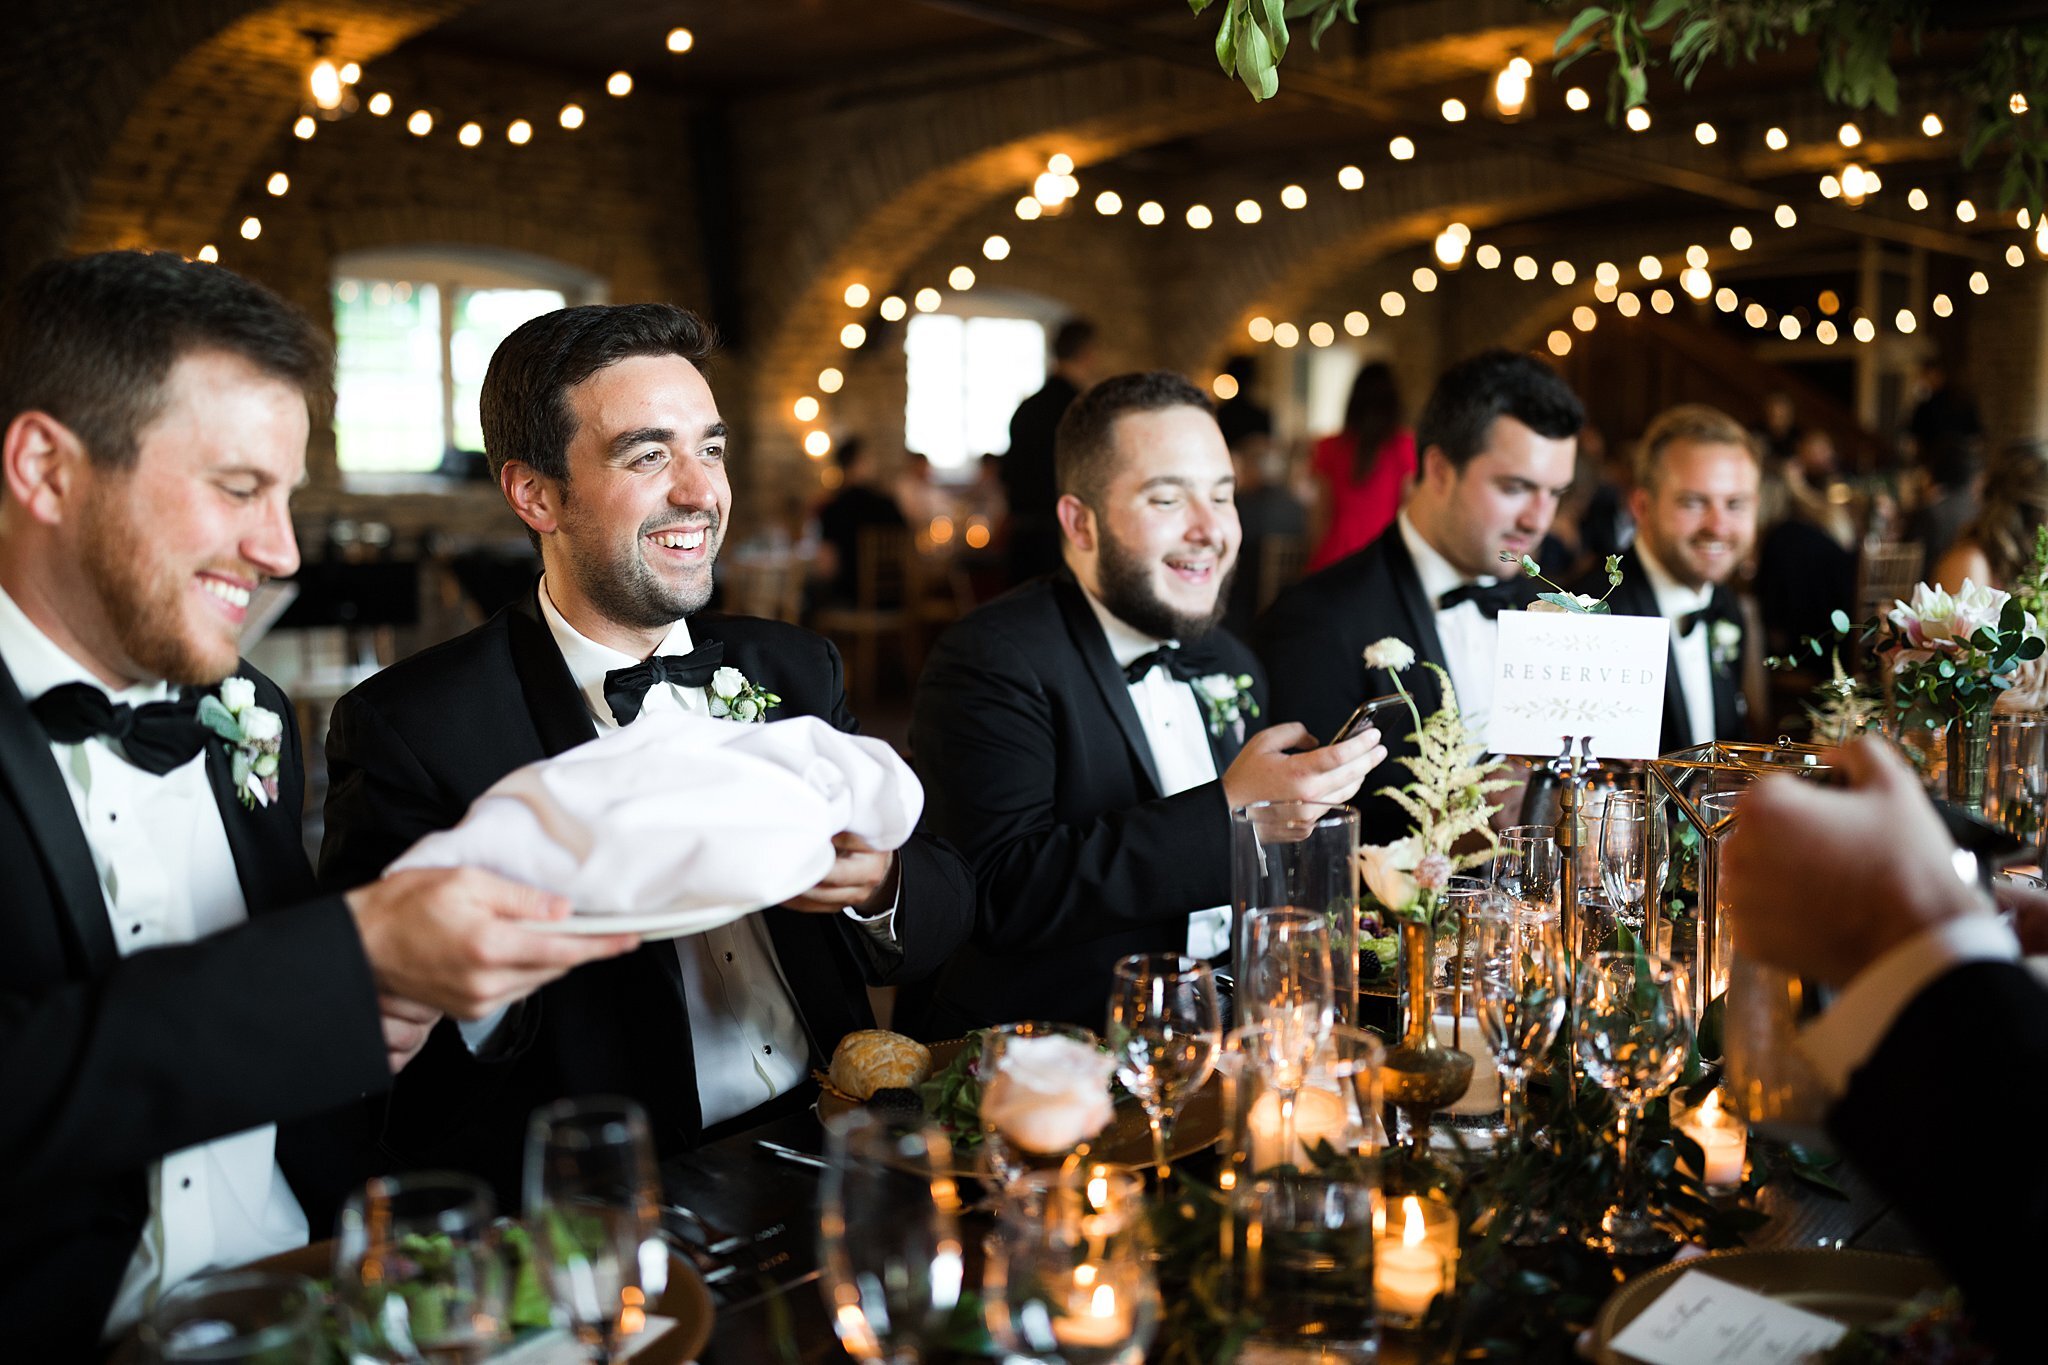  Groomsmen at head table passing a plate of bread. 